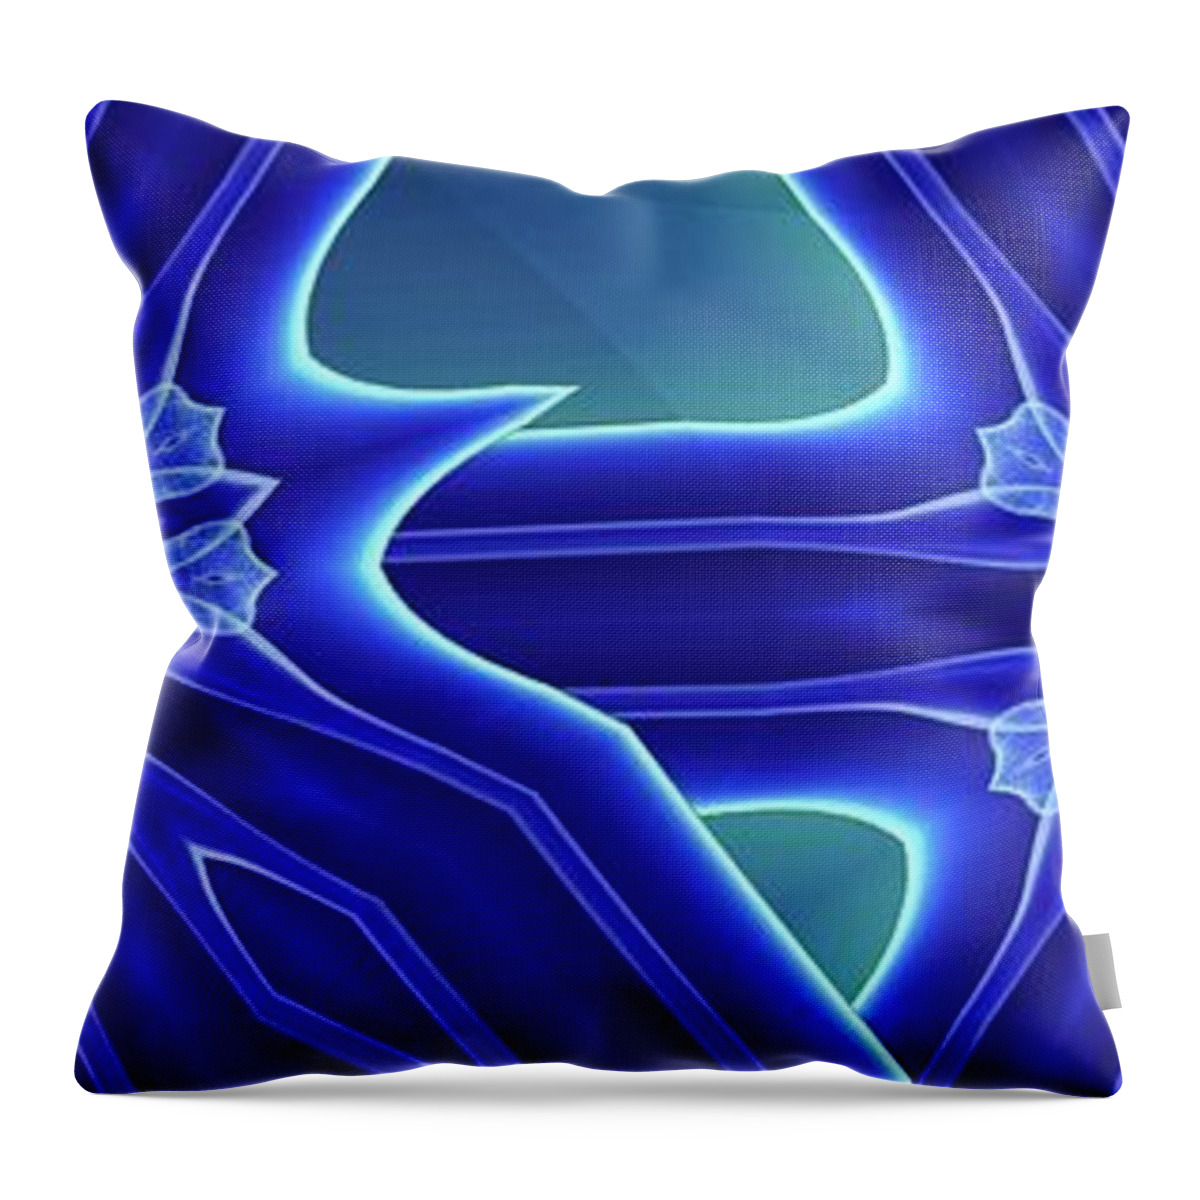 Collage Throw Pillow featuring the digital art Blued by Ronald Bissett